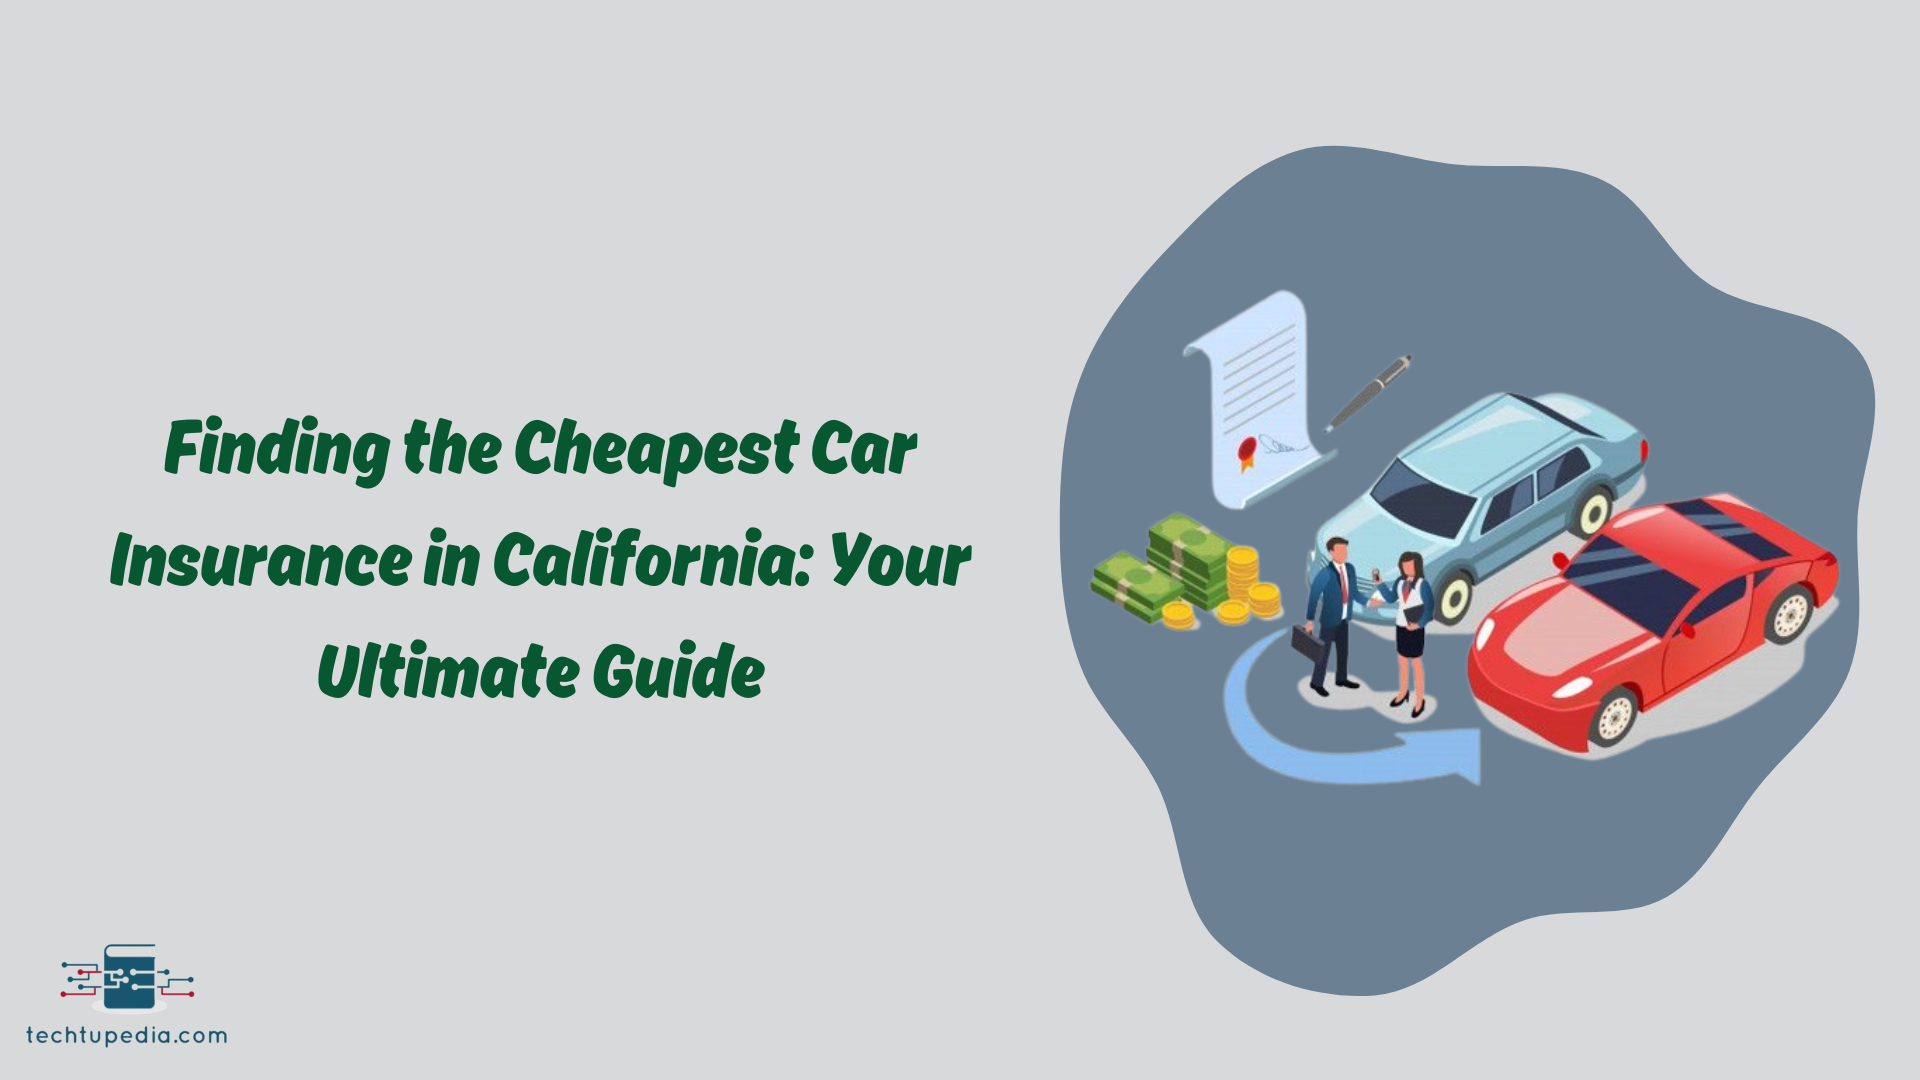 Finding the Cheapest Car Insurance in California: Your Ultimate Guide